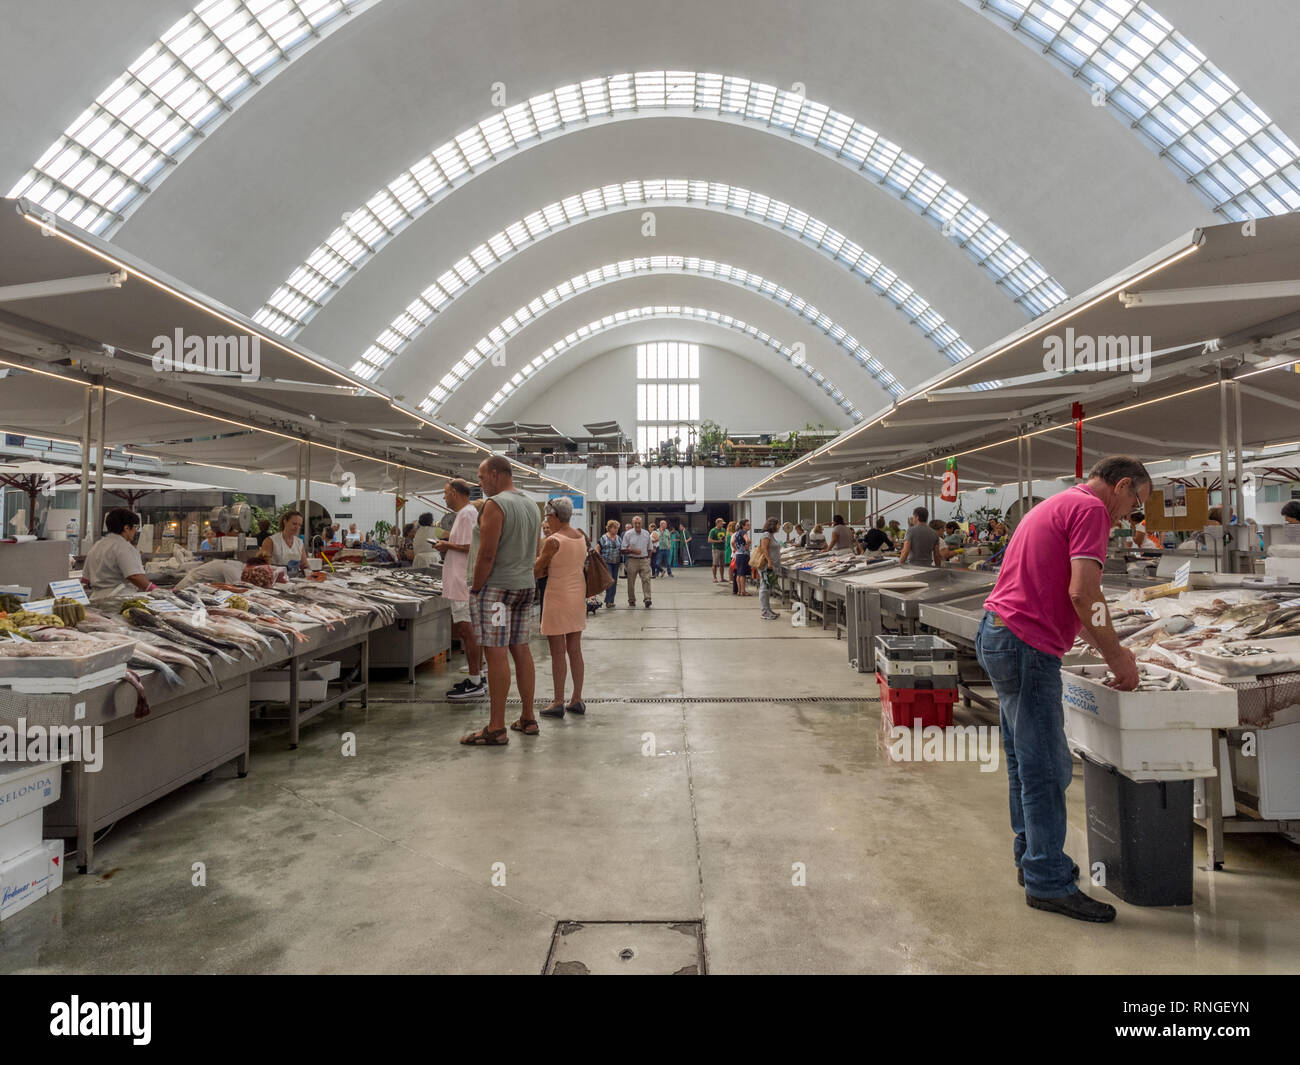 Modern clean light and airy Matosinhos municipal indoor market with a domed curved see-through glass roof near Porto in Portugal Stock Photo